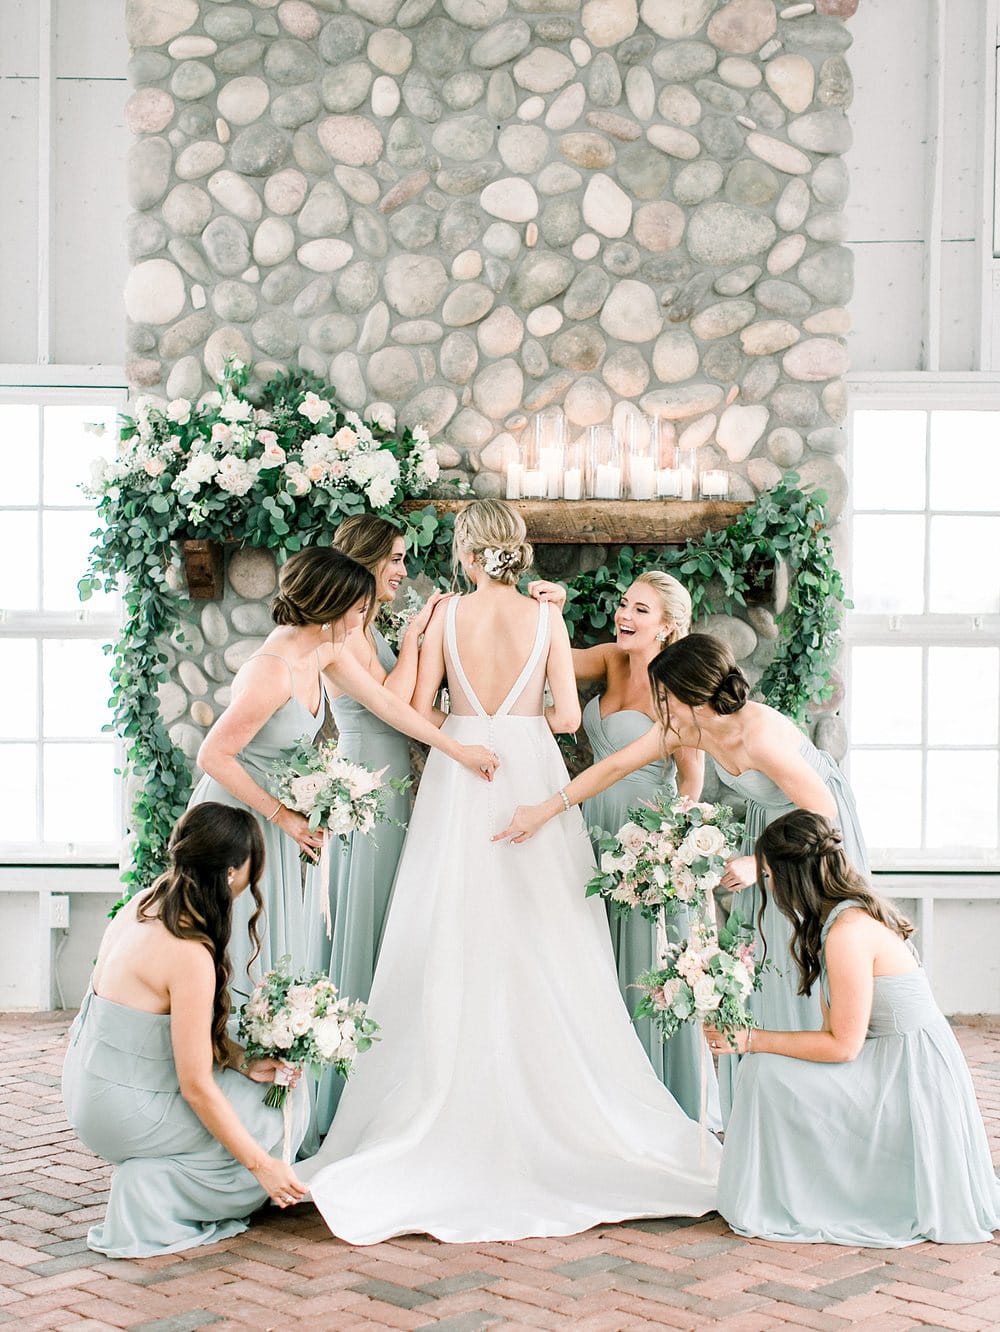 Bride in a white wedding dress and her bridesmaids in a green dresses